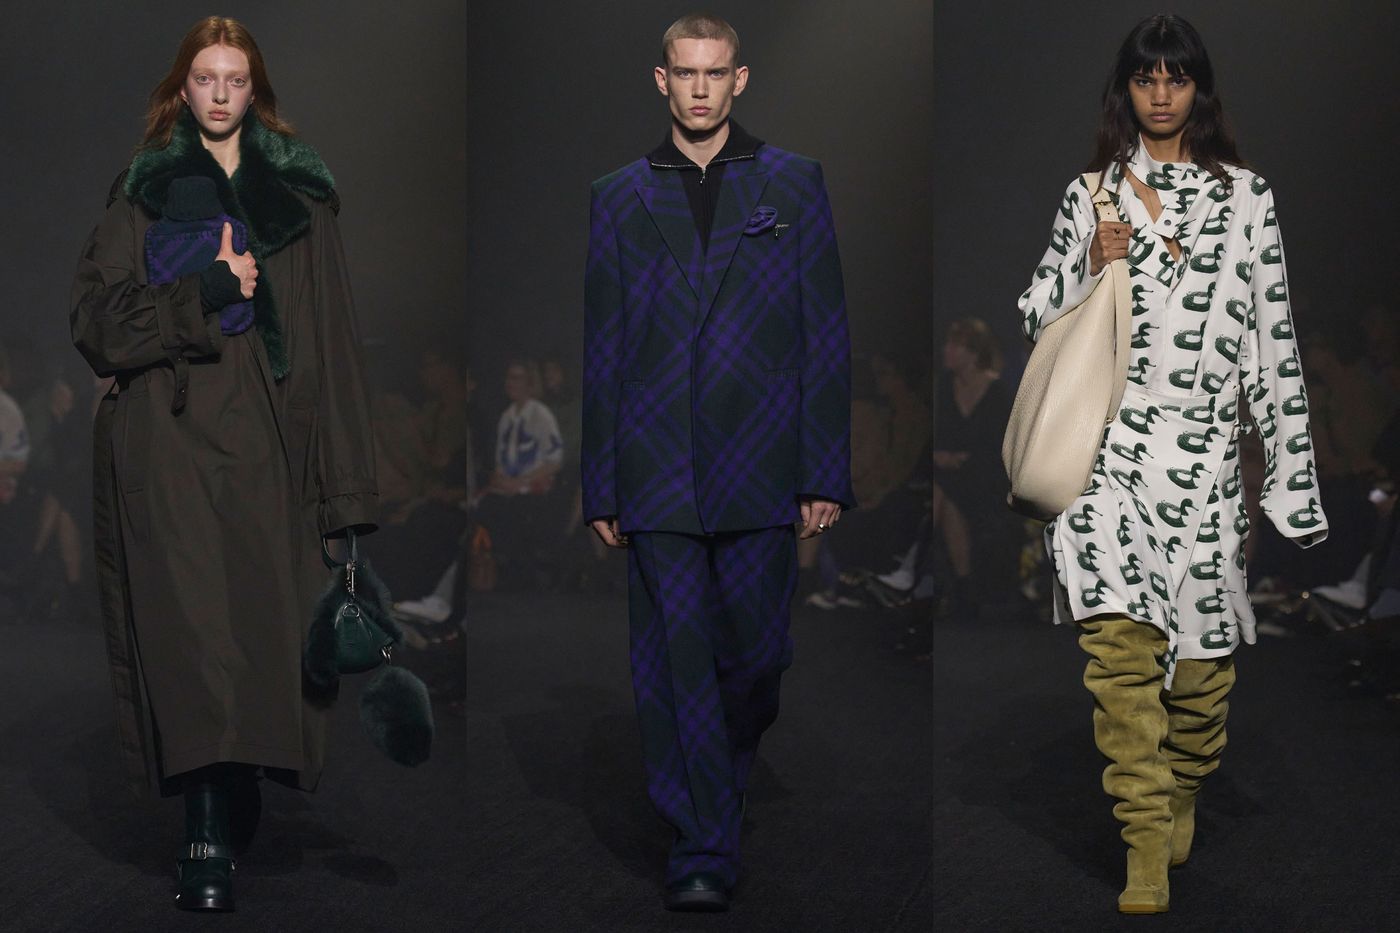 London Fashion Week: Burberry Has Its Confidence Back With Daniel